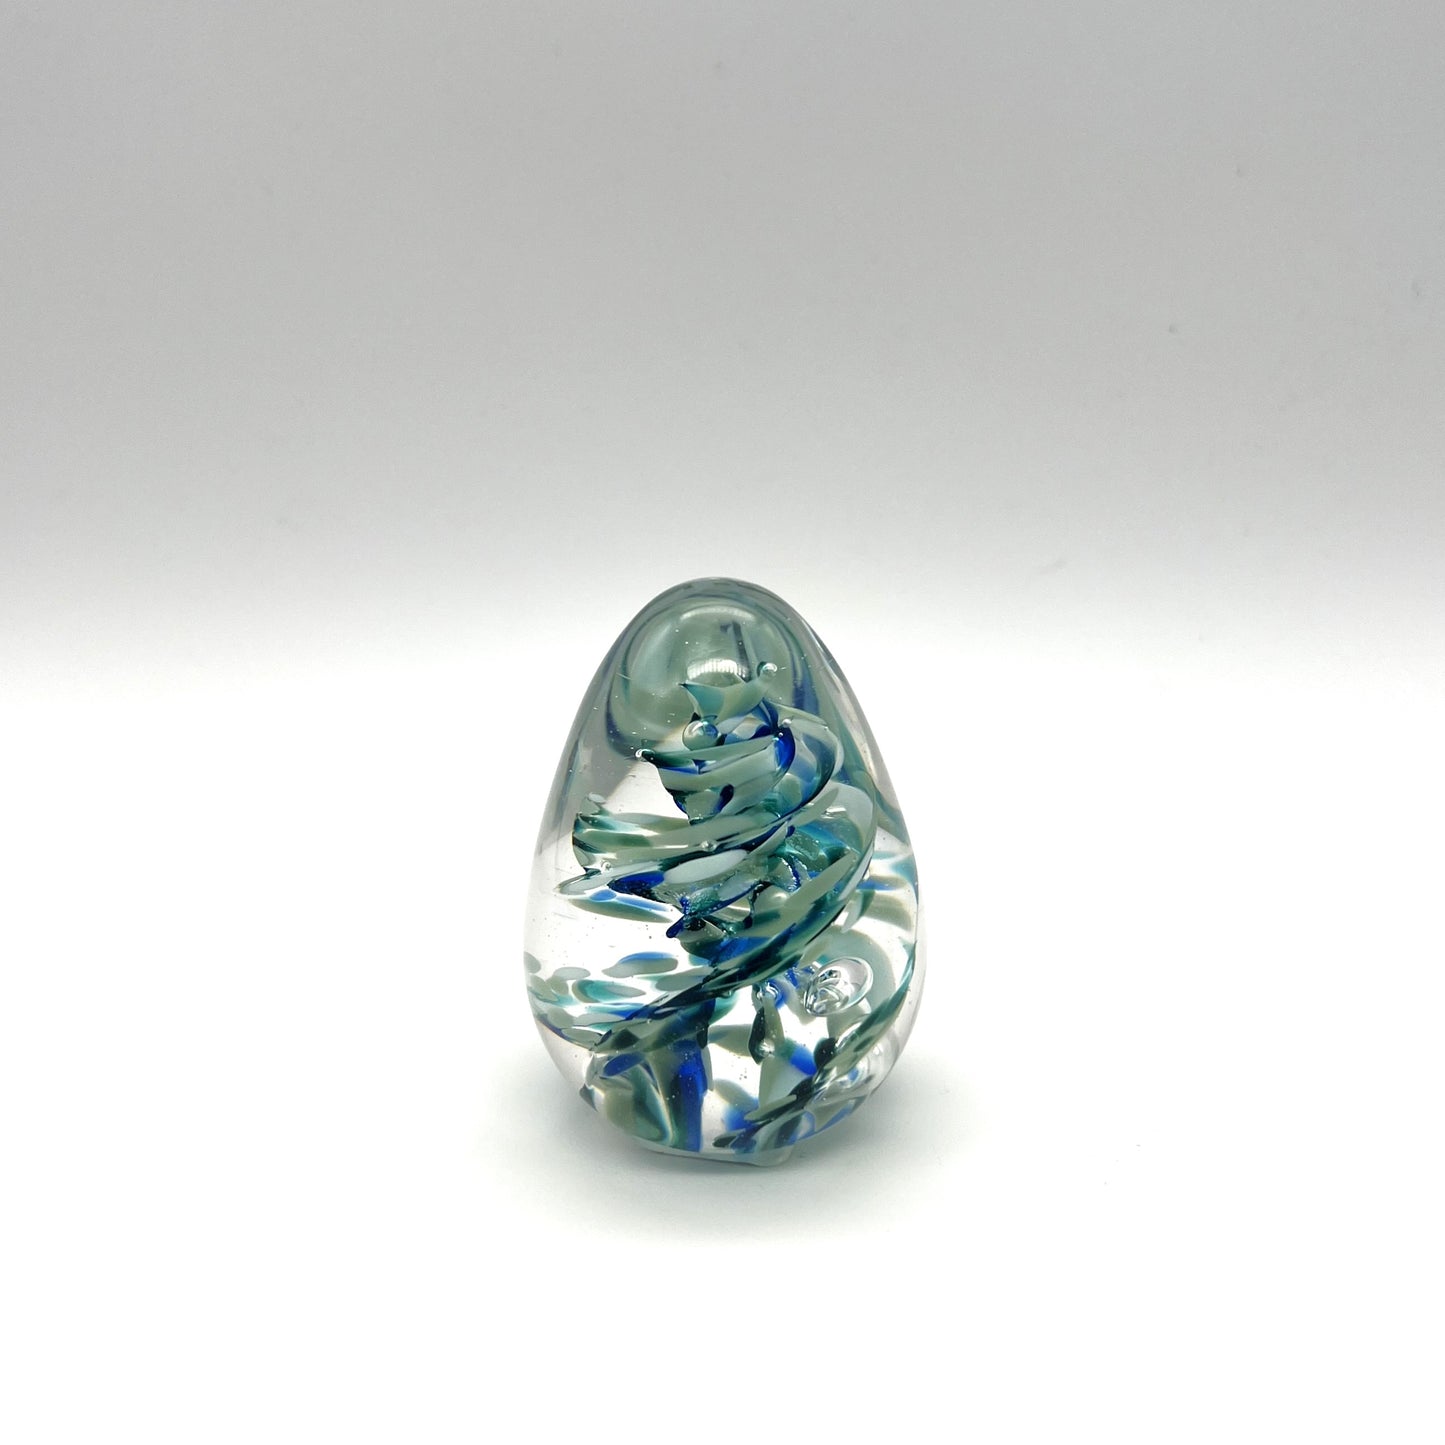 Teal Egg Paperweight by Boise Art Glass